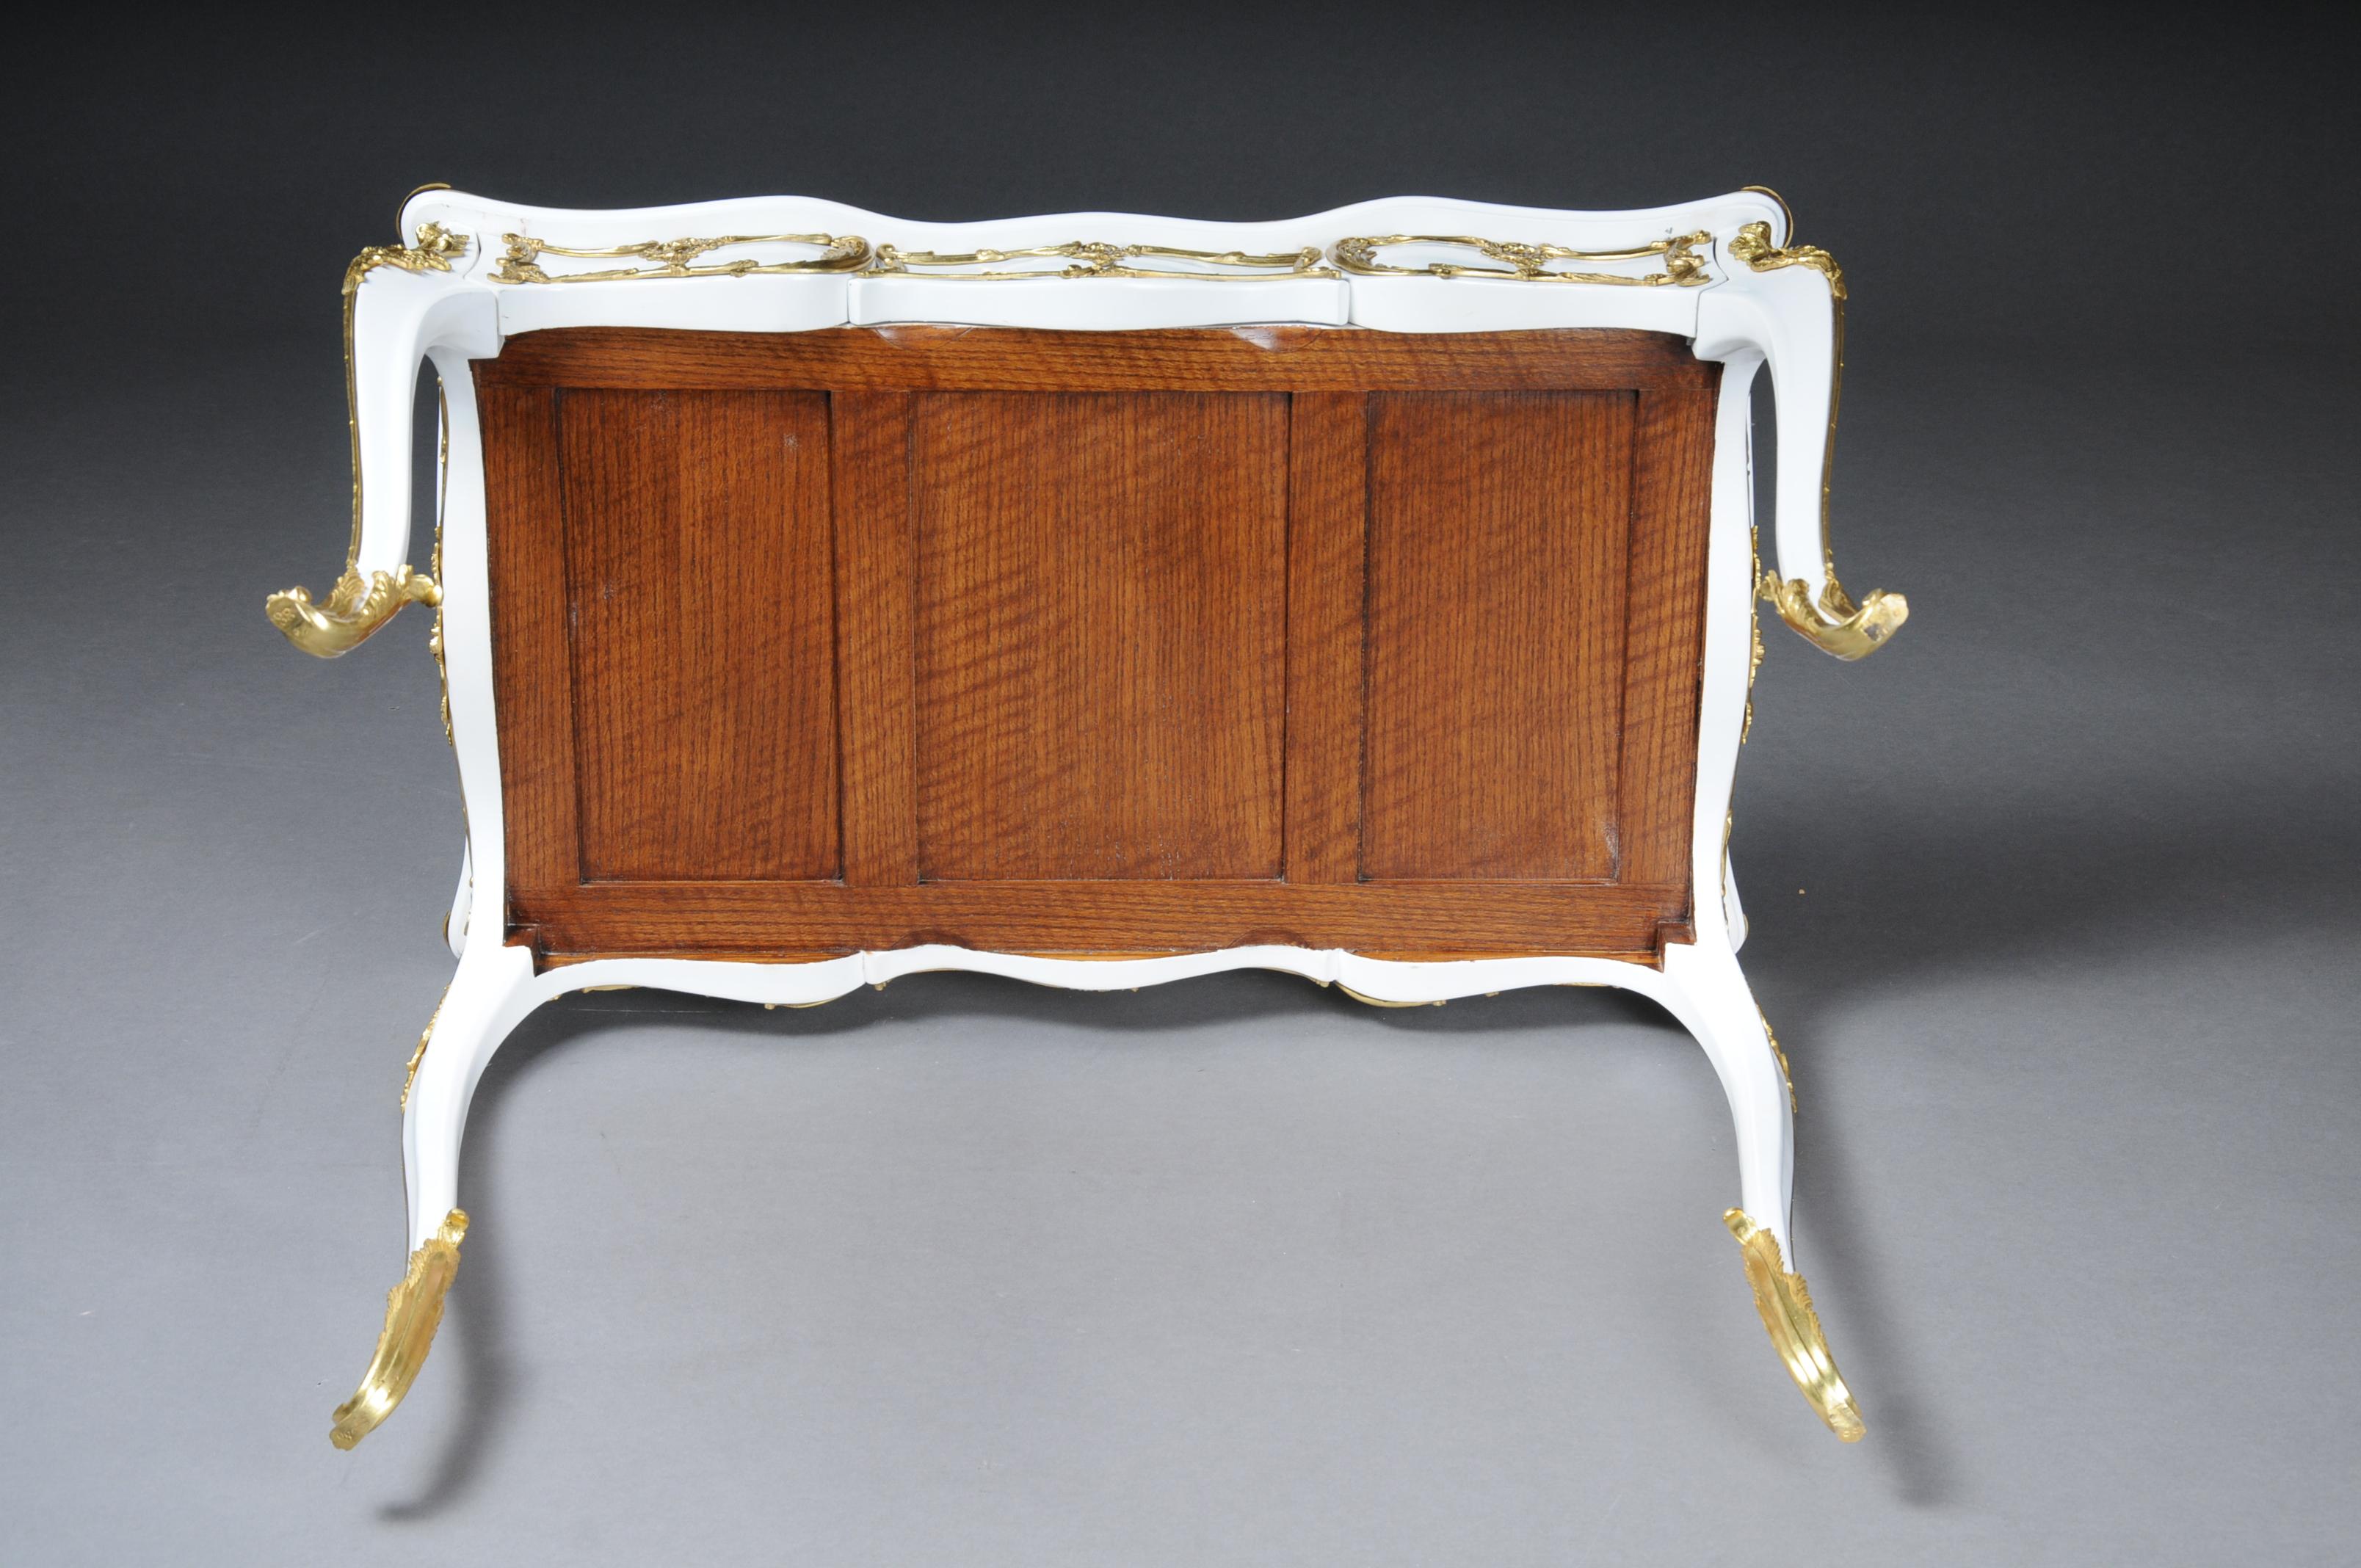 20th Century Luxurious White Bureau Plat / Writing Desk in Louis XV Style For Sale 12